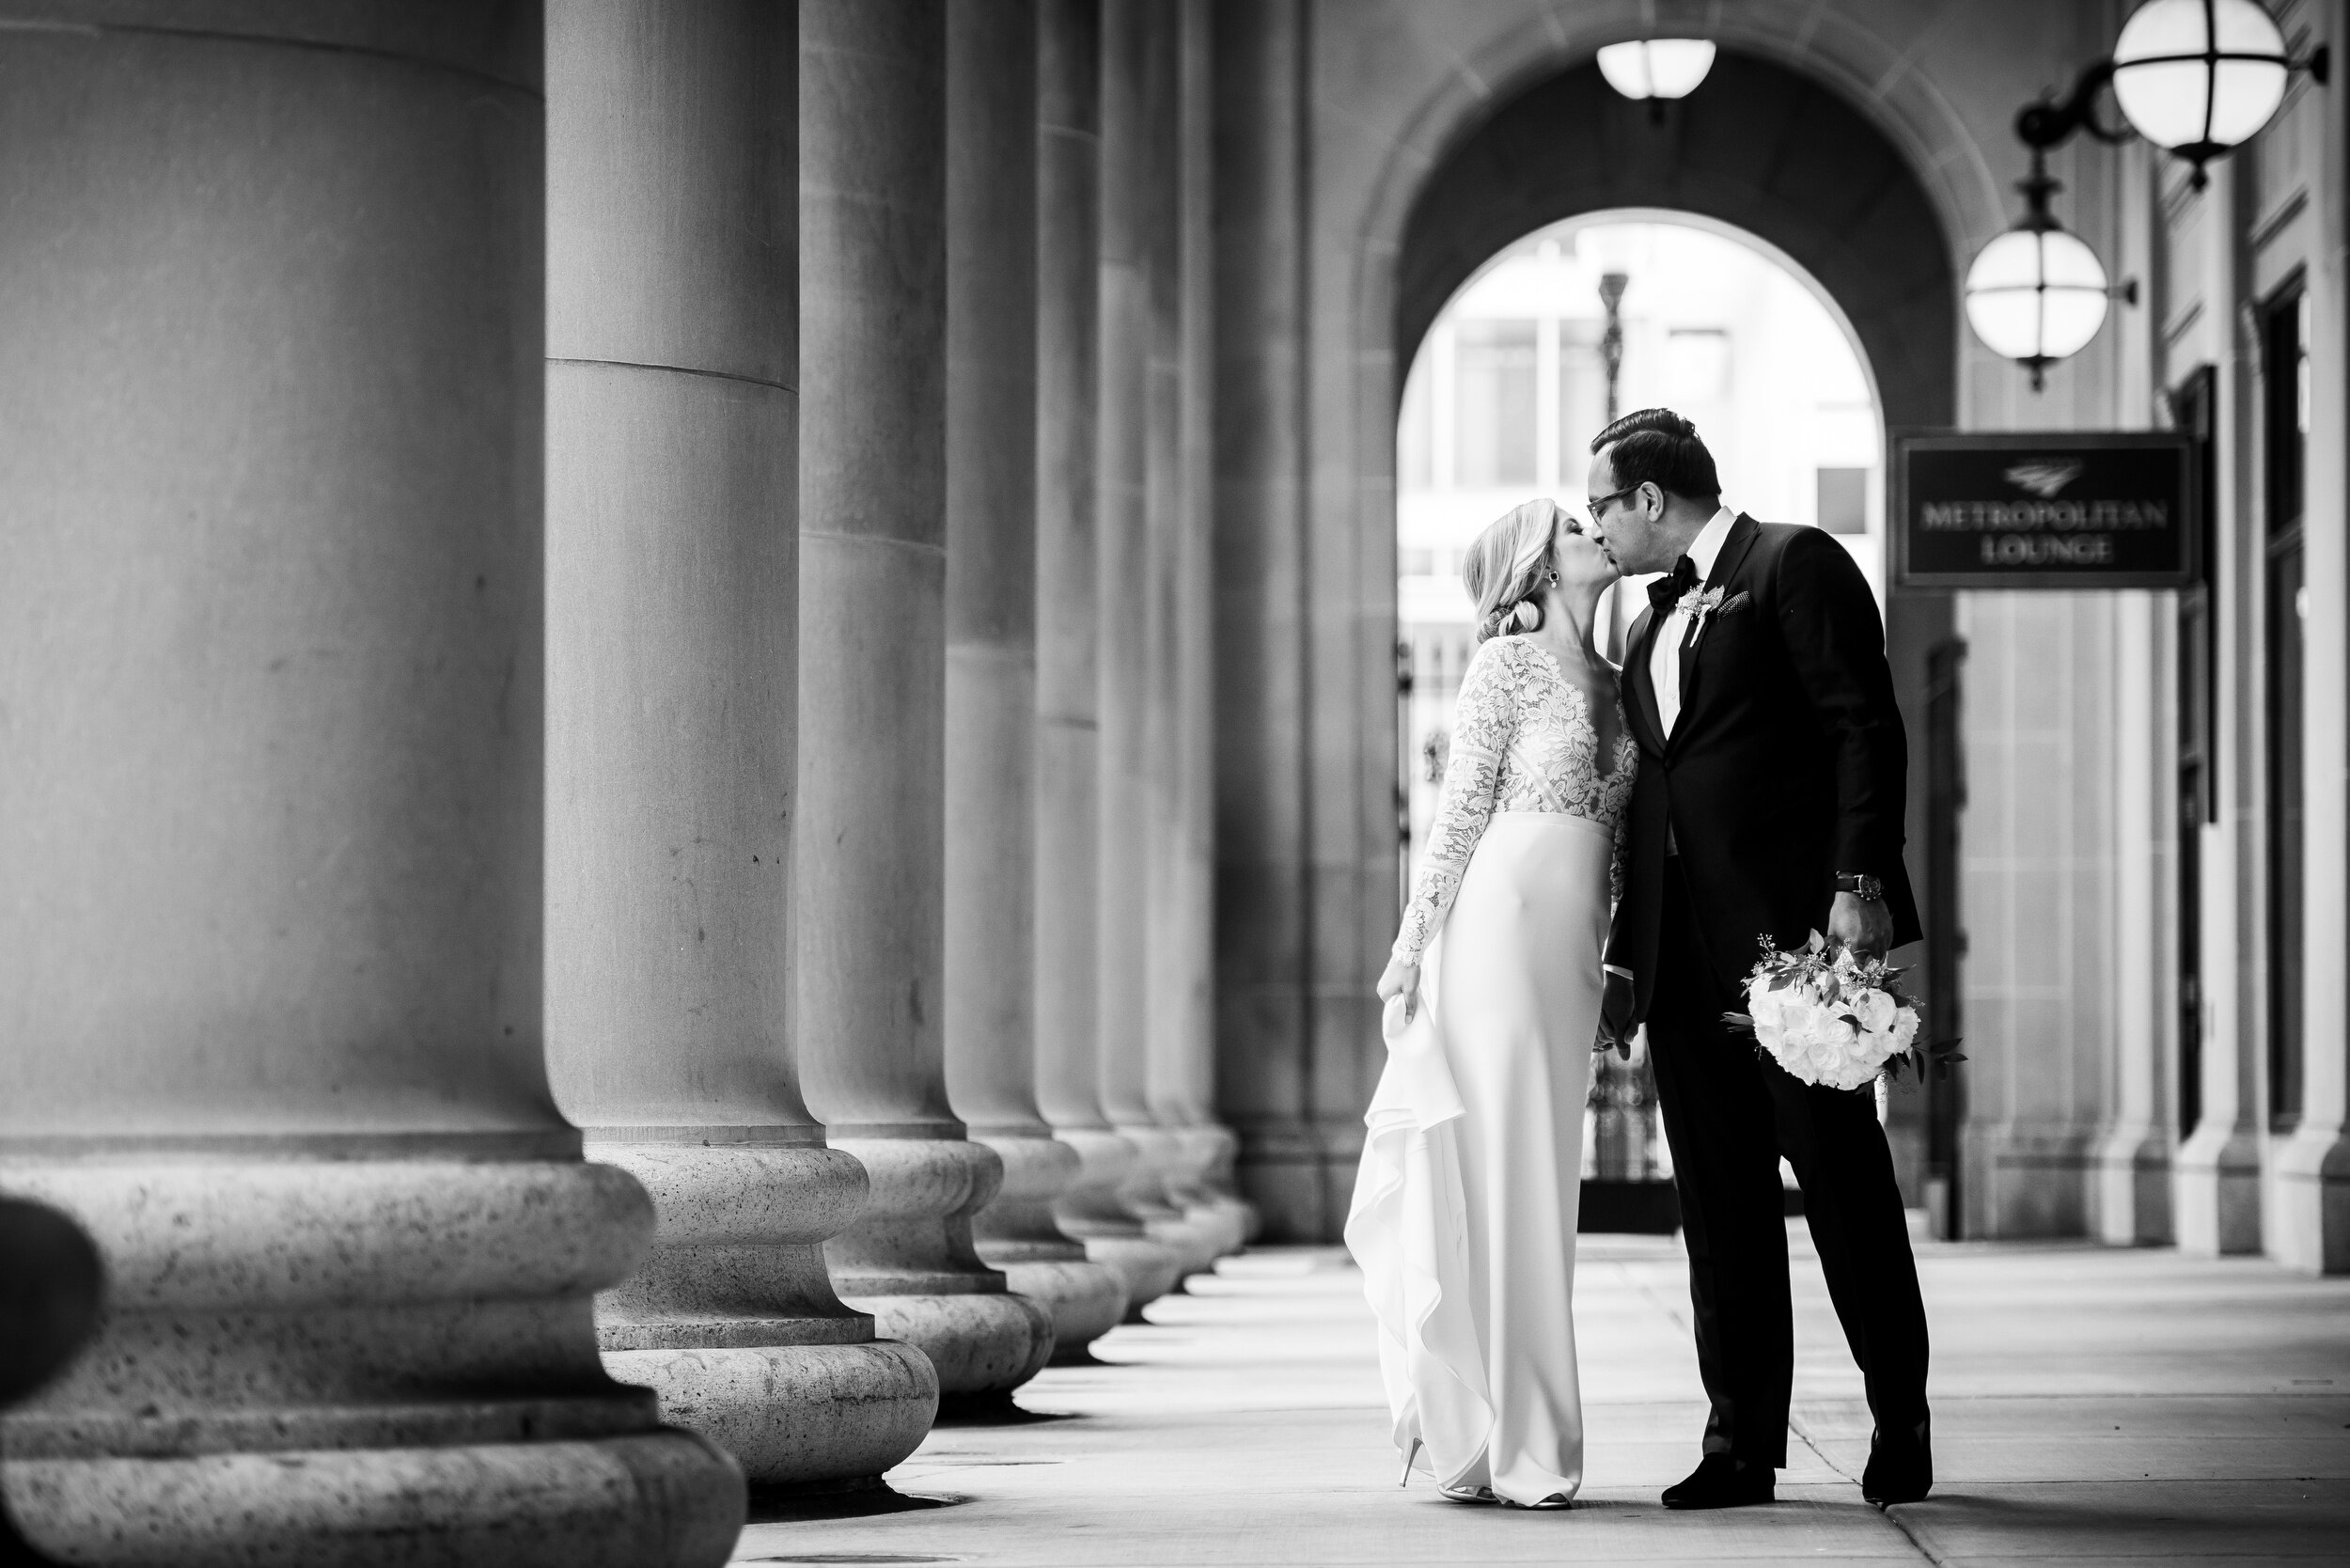 Creative wedding portrait outside Chicago Union Station:Geraghty Chicago wedding photography captured by J. Brown Photography.